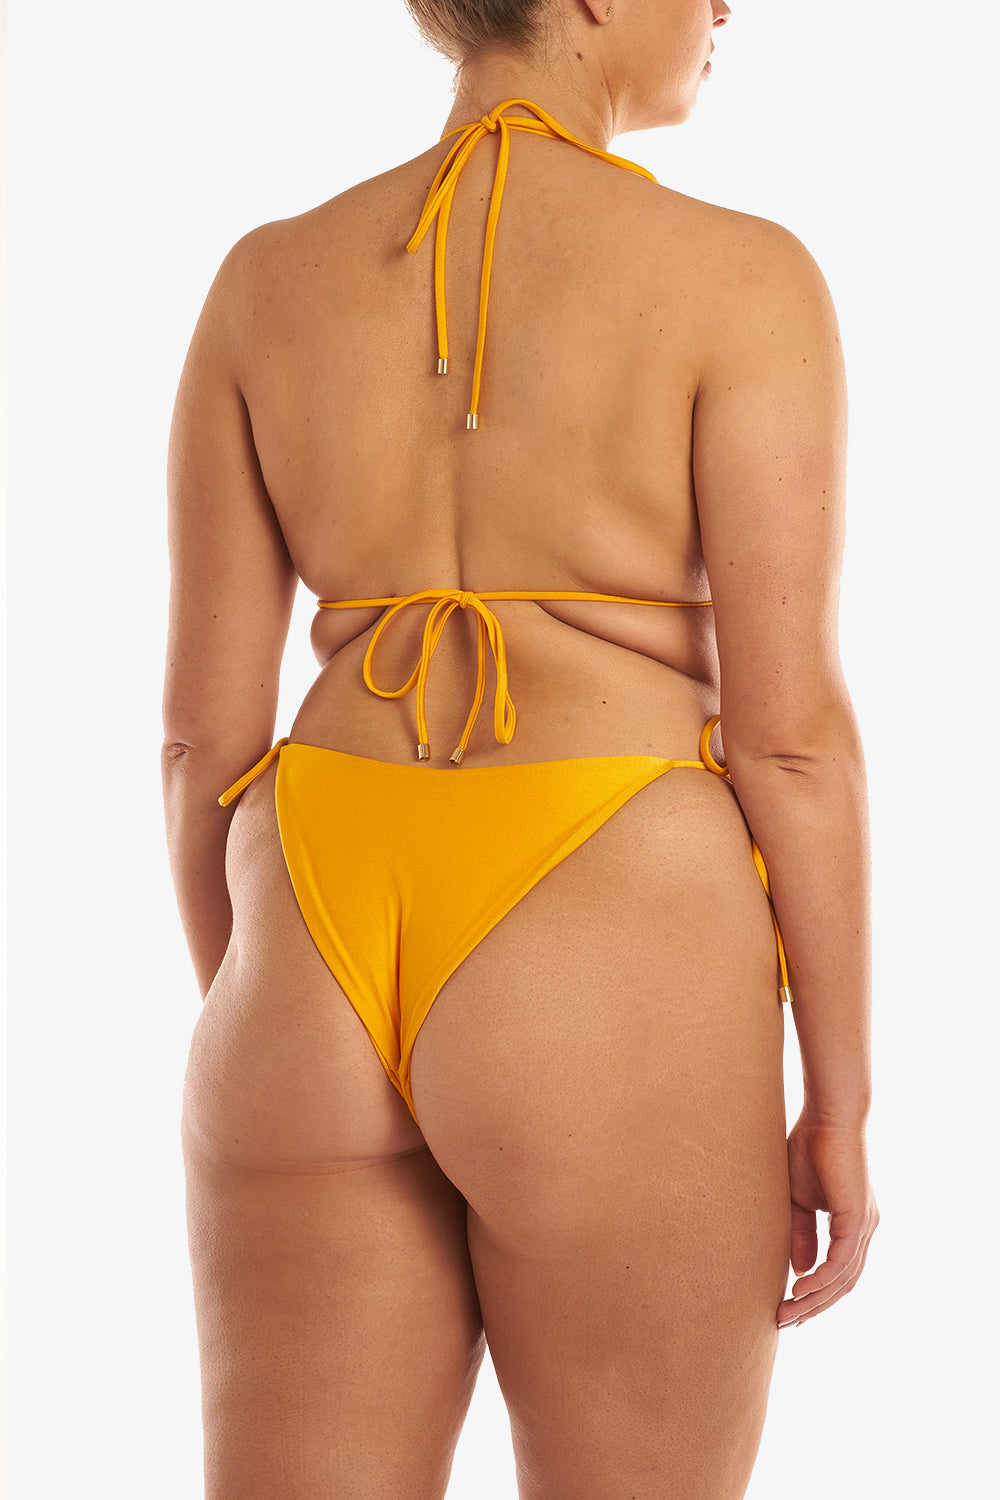 Dioni bottom - elixia. A bottom with golden details and medium coverage.